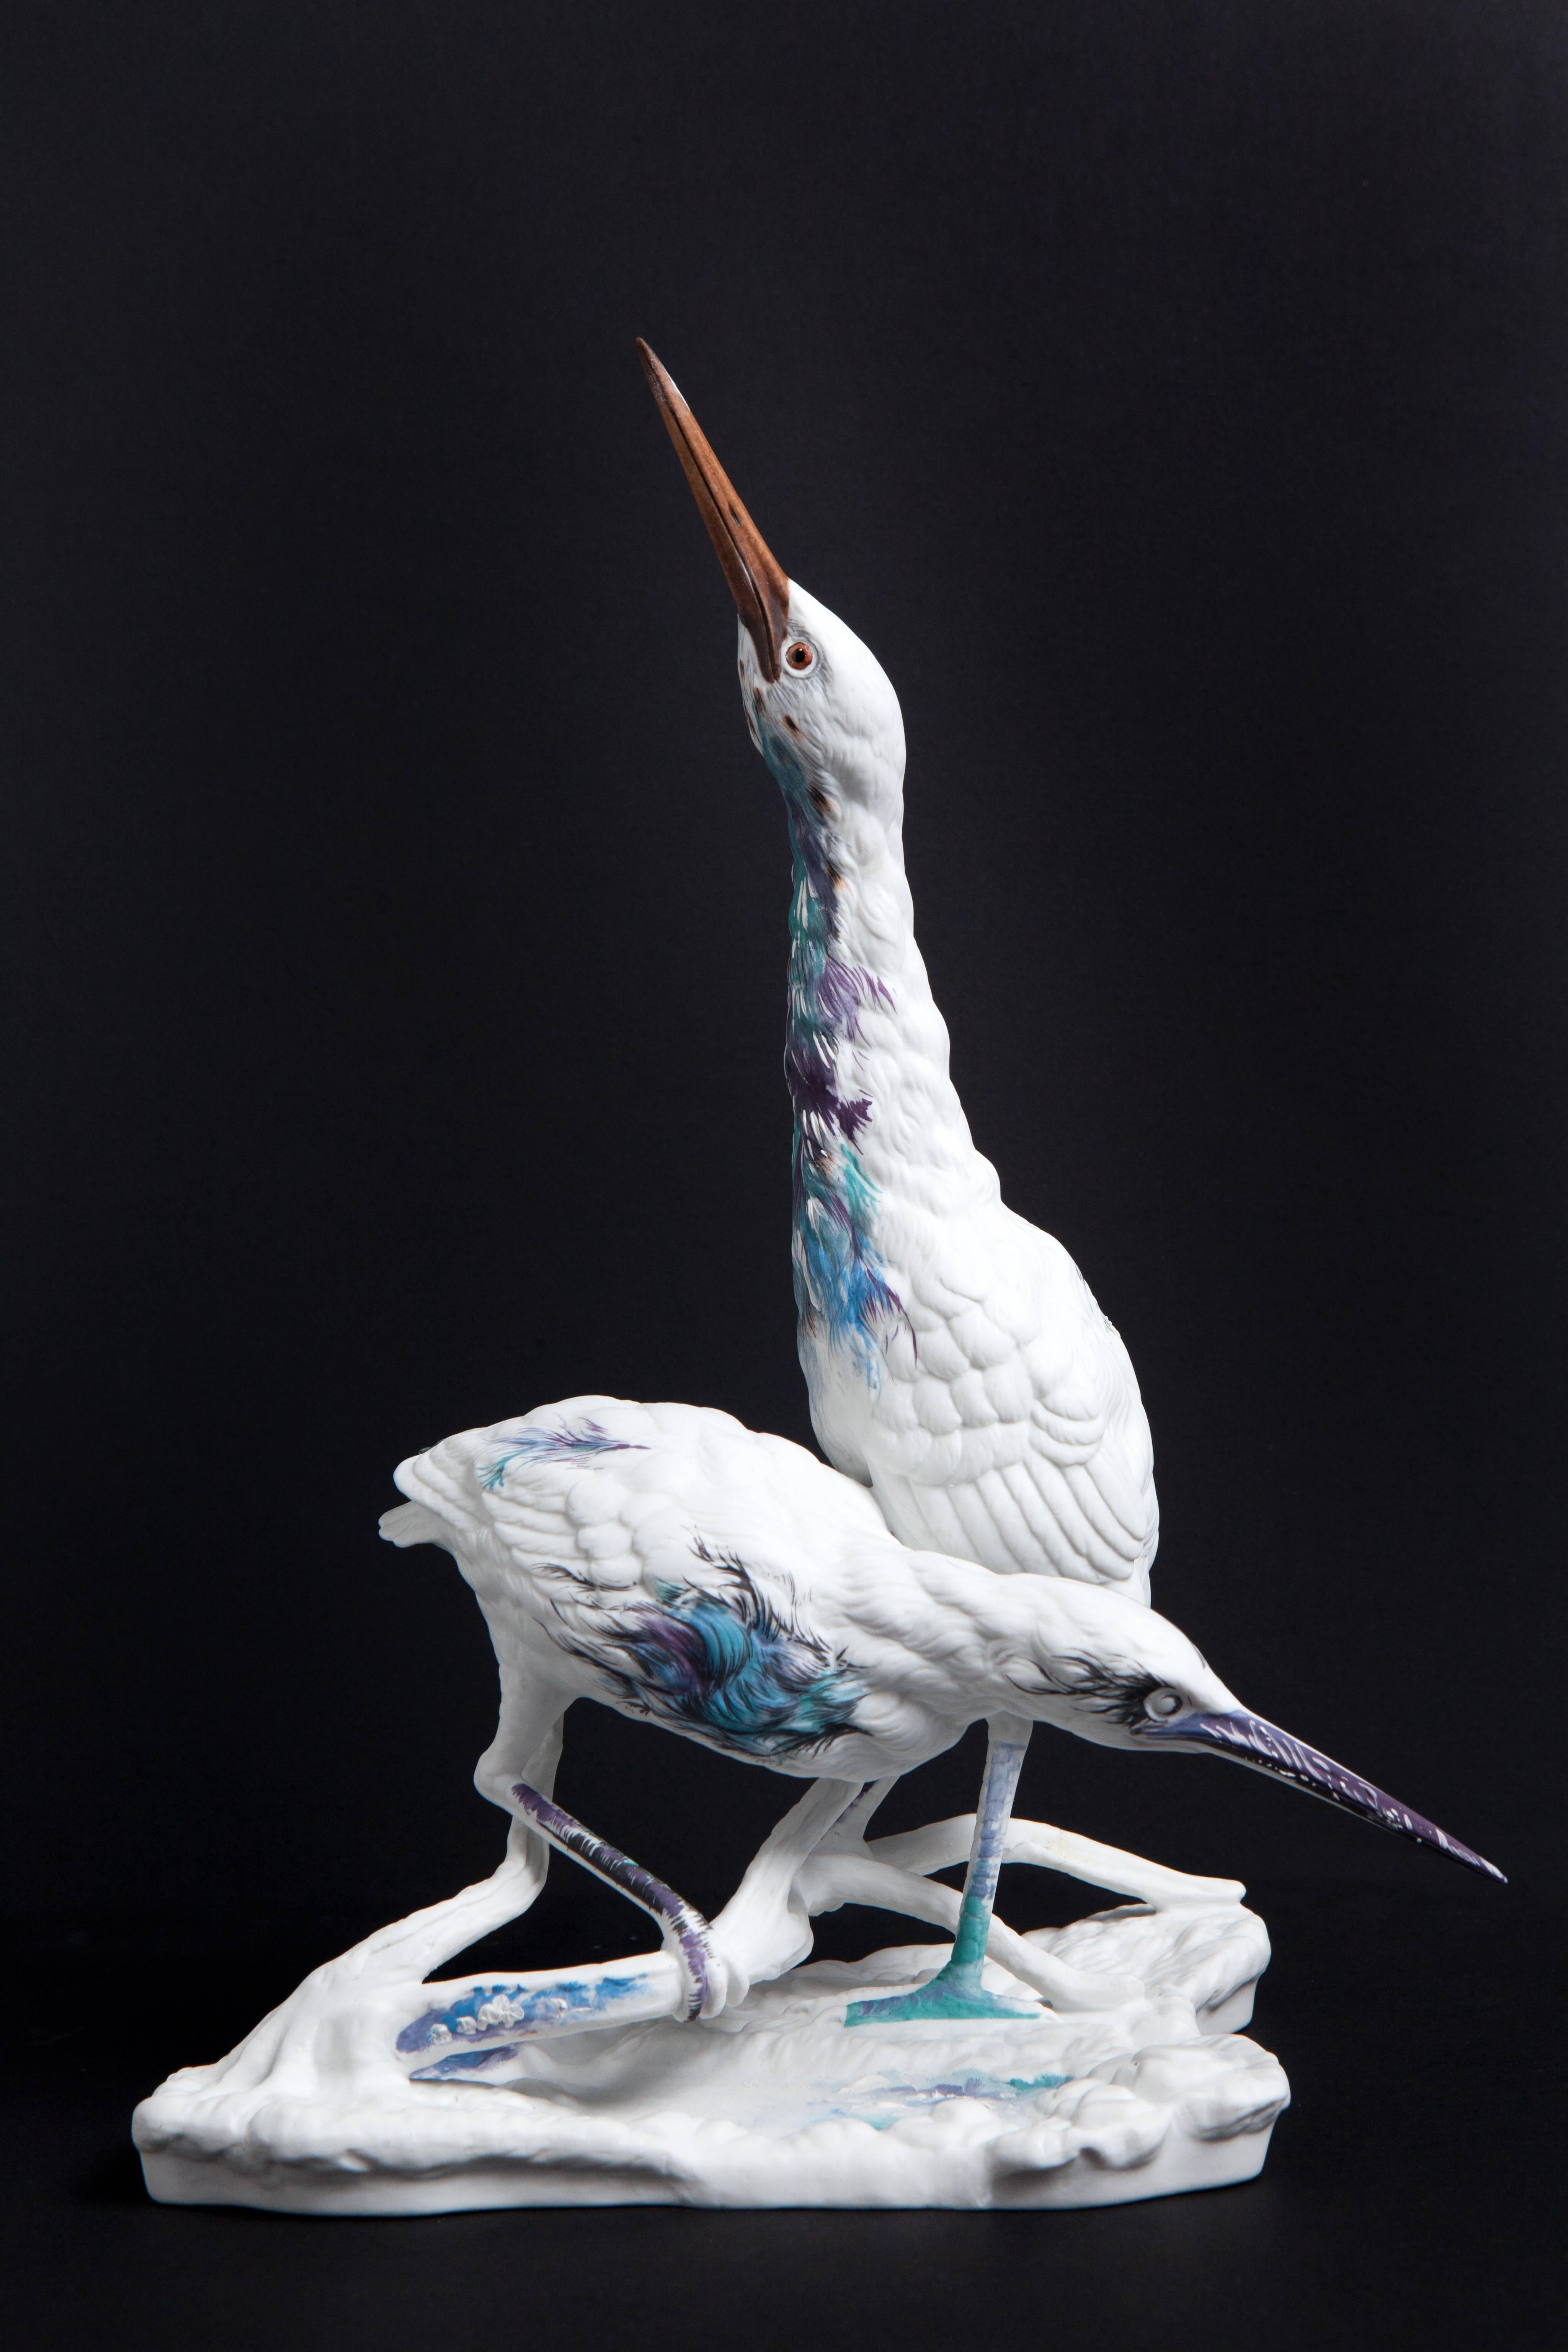 This hand-painted porcelain bird was designed by Sam Baron in 2012. 

Born in France in 1976, Sam Baron has a degree in Design from the Fine Arts School of Saint Etienne and a post-graduate degree from the National Decorative Arts School of Paris.